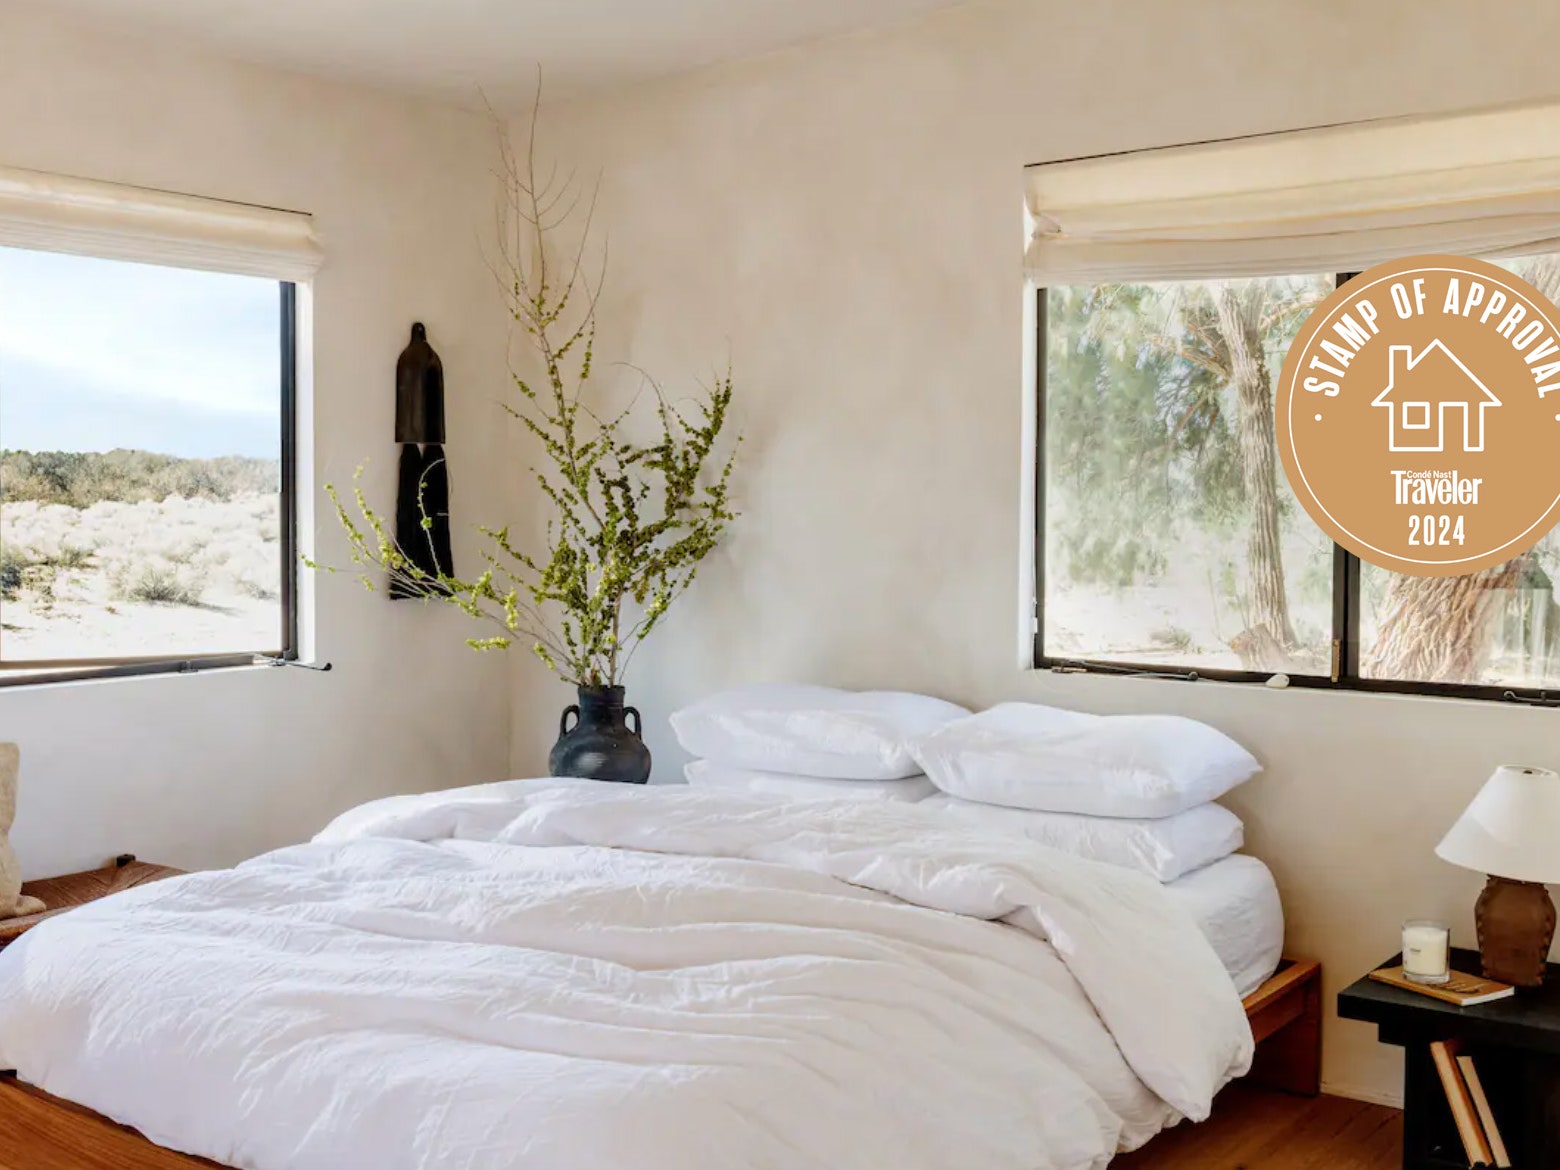 My Favorite Airbnb: A Desert Abode on 10 Acres Outside Joshua Tree